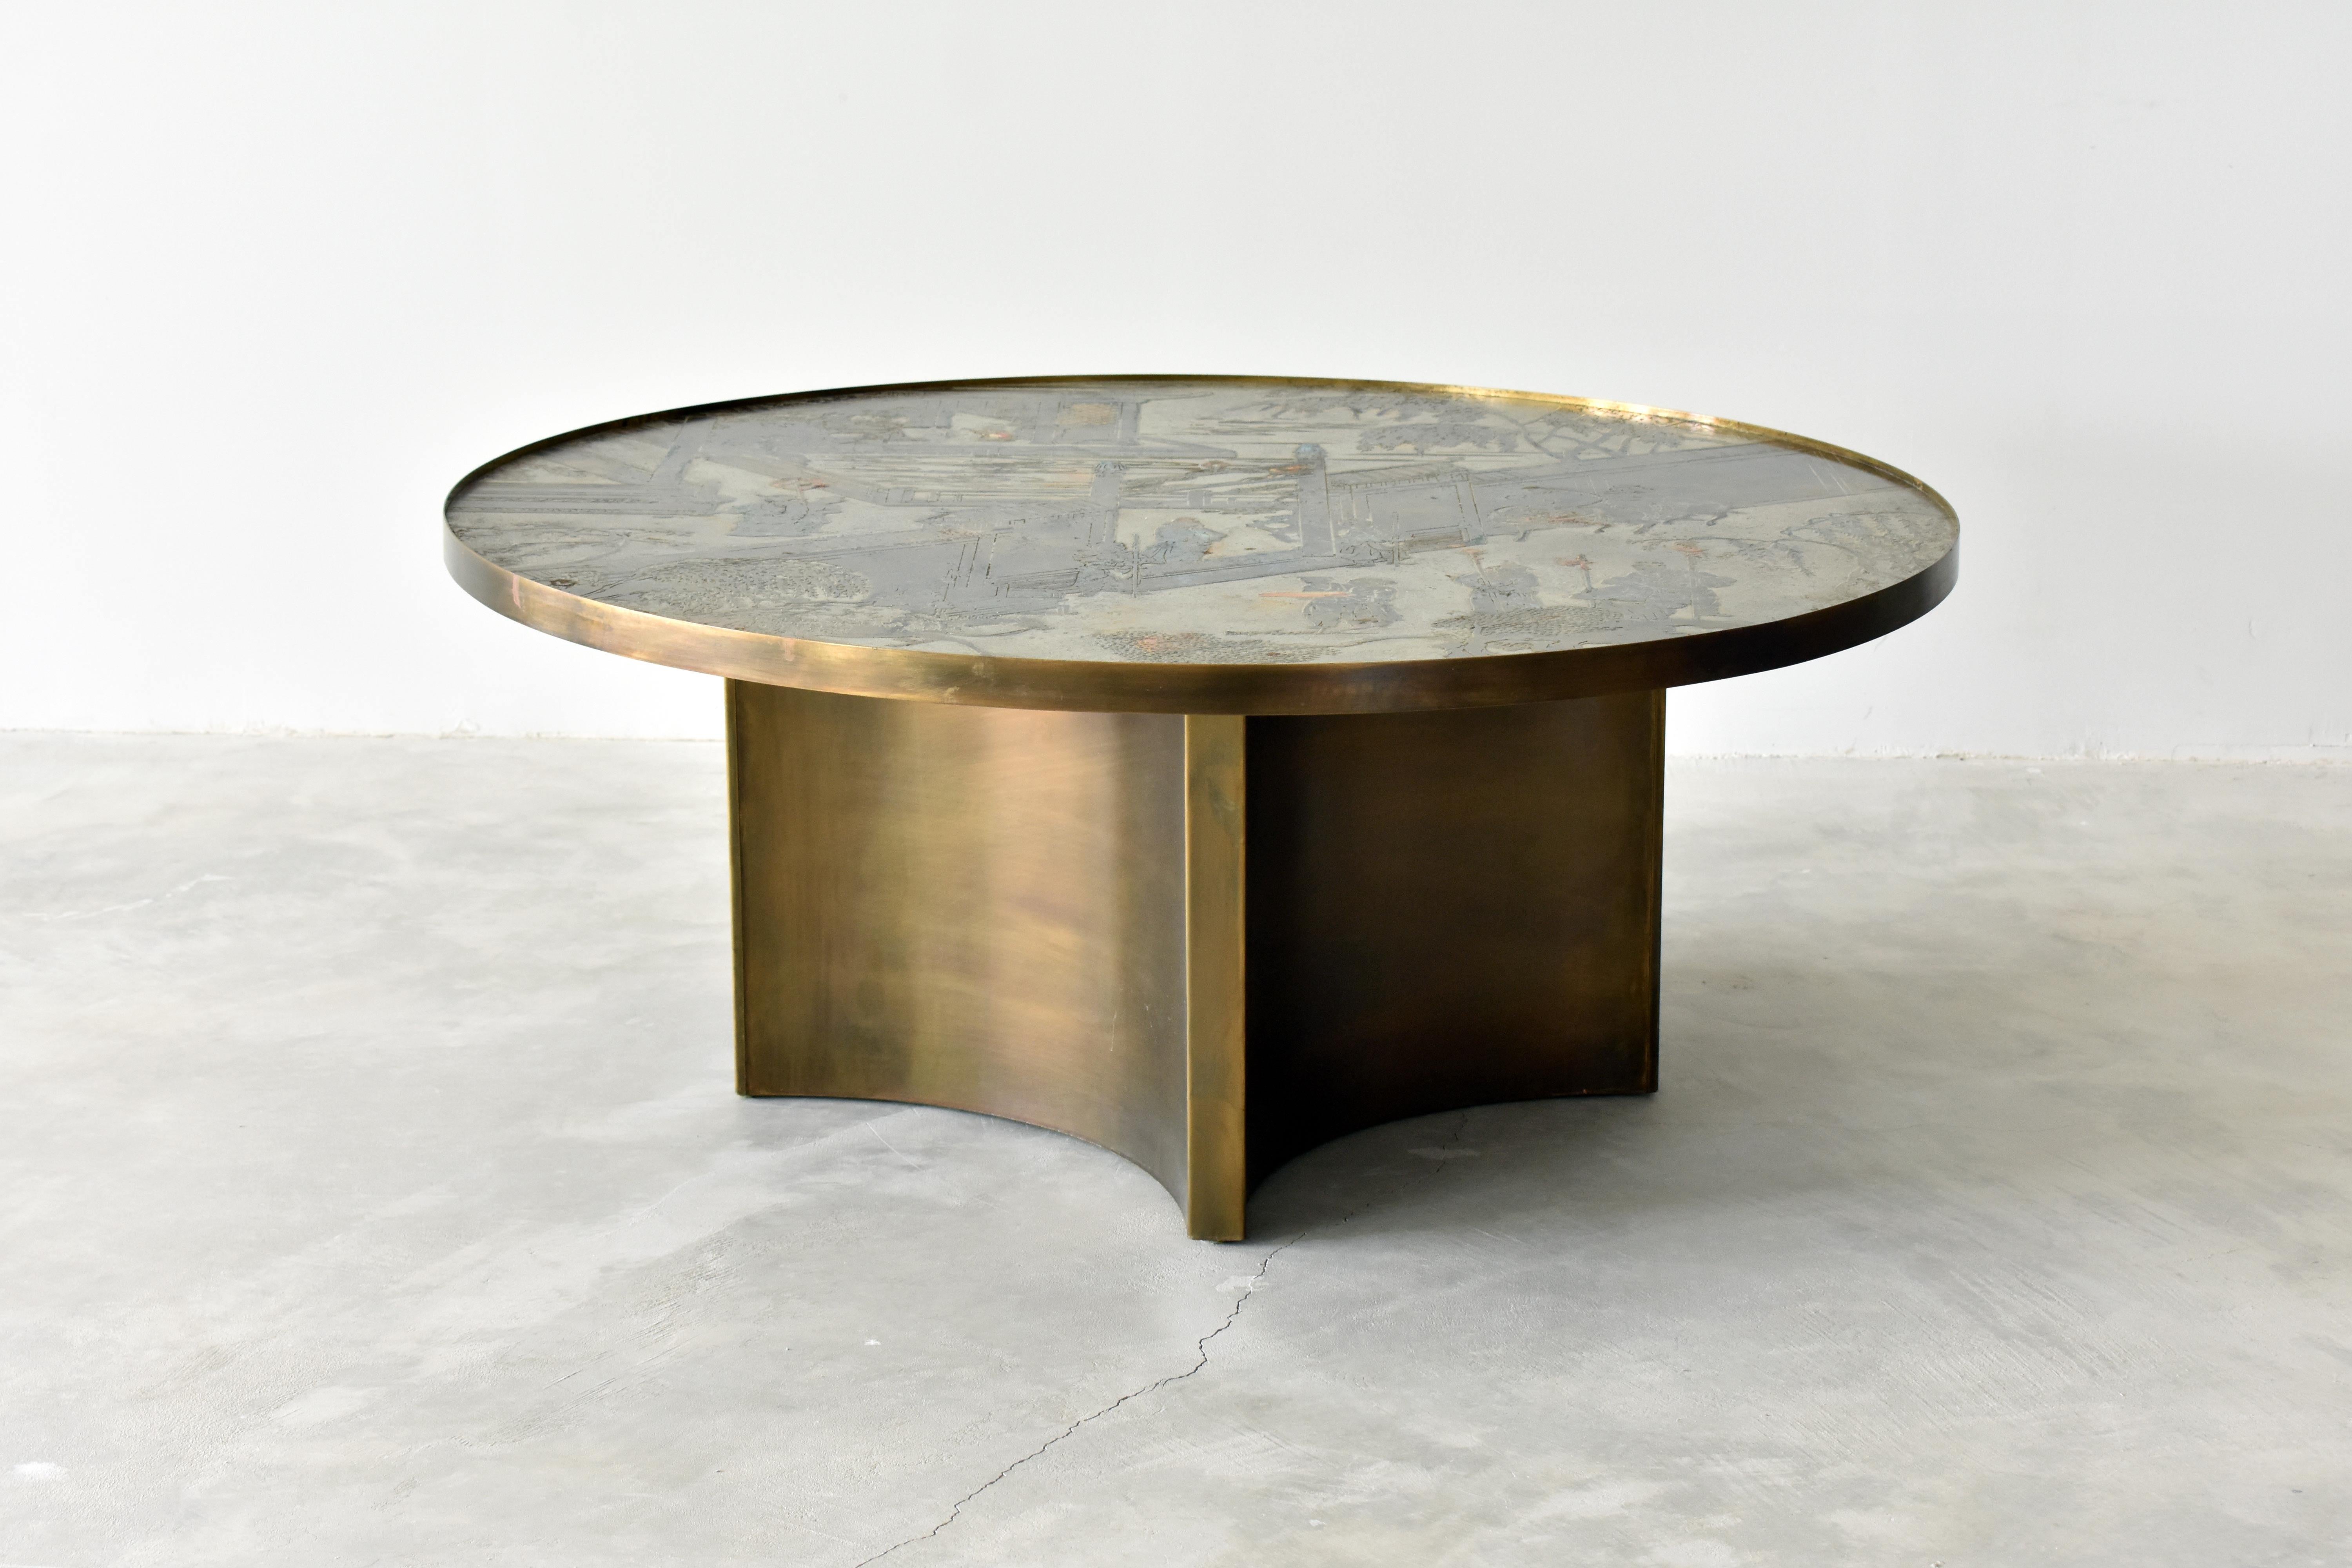 A rare and possibly custom ordered round coffee table or cocktail table by Philip & Kelvin LaVerne. The top bears the motif of the 